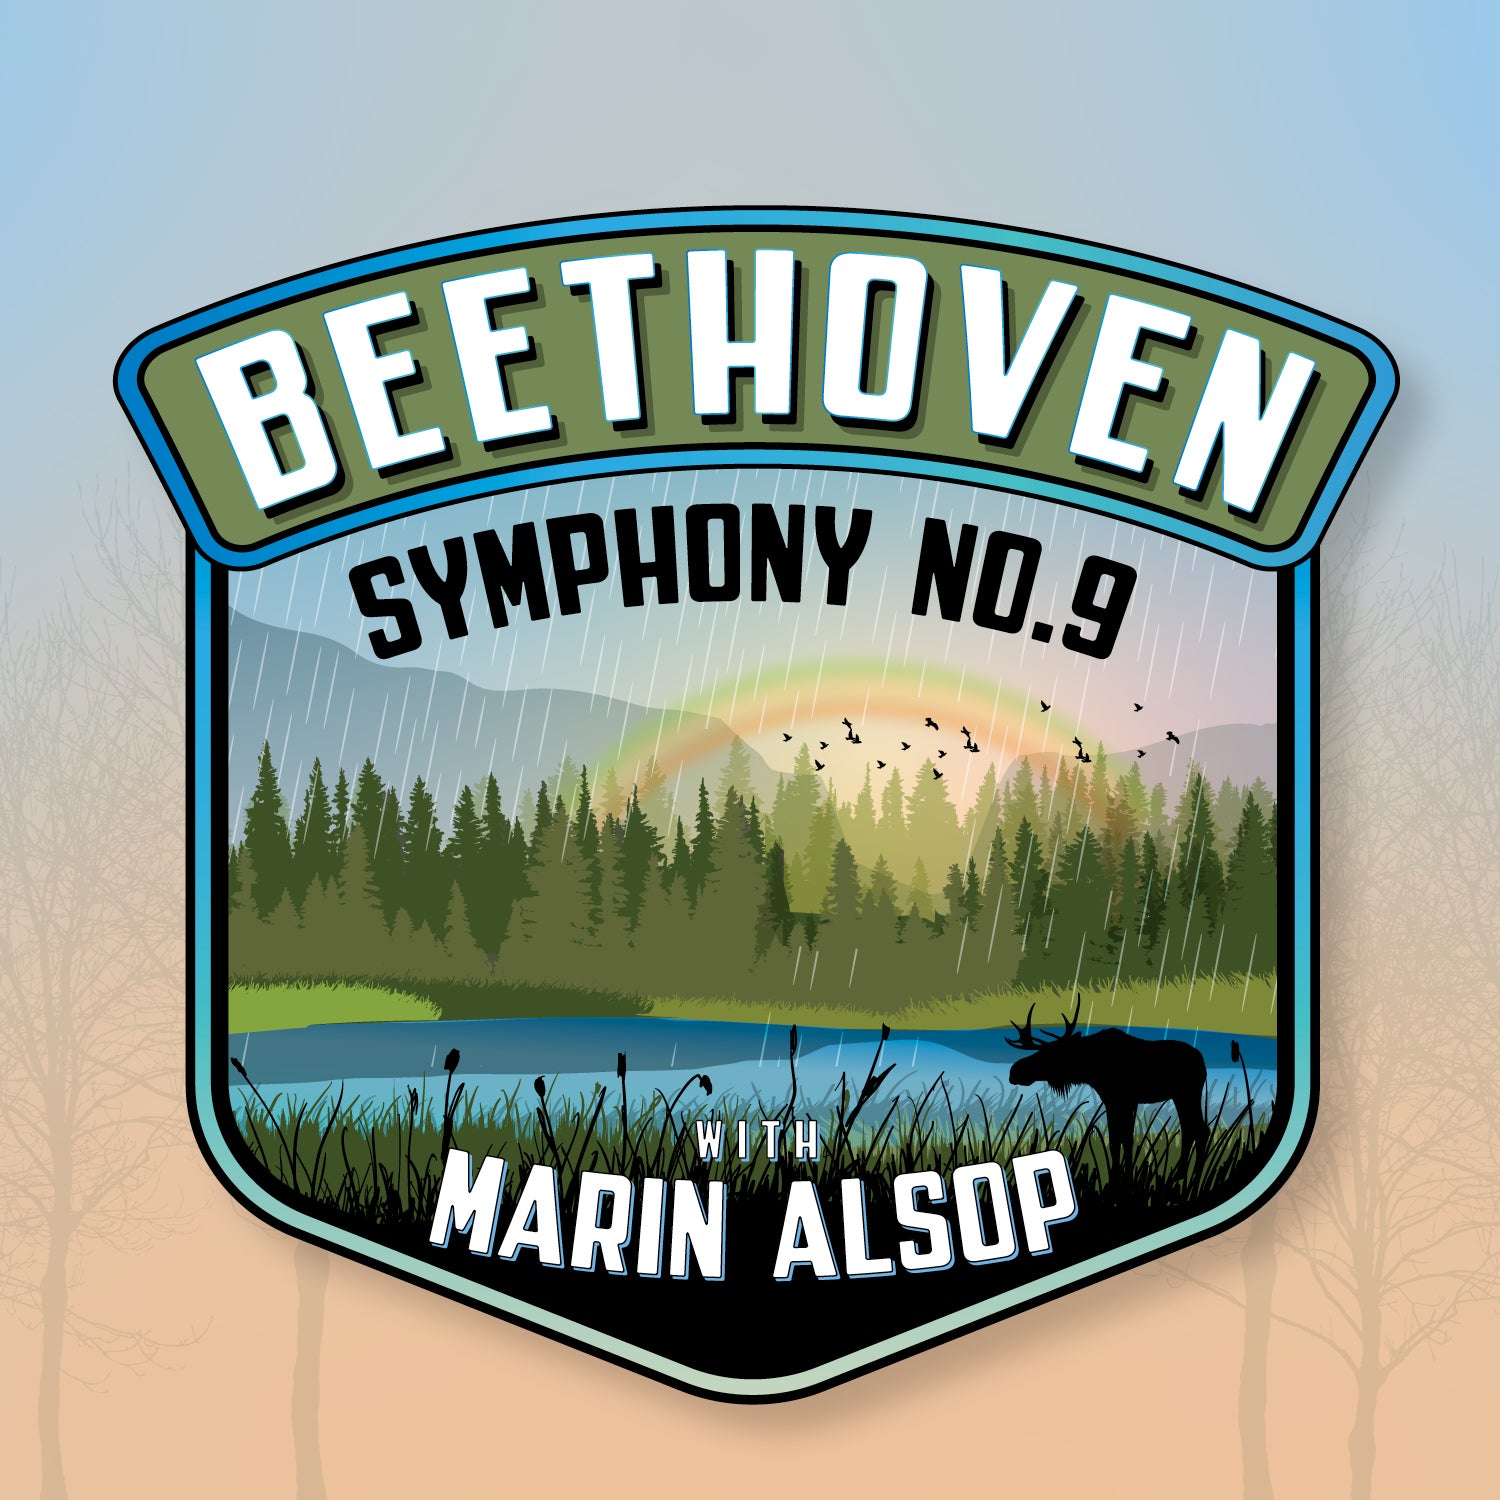 More Info for Beethoven's Ninth Symphony with Marin Alsop